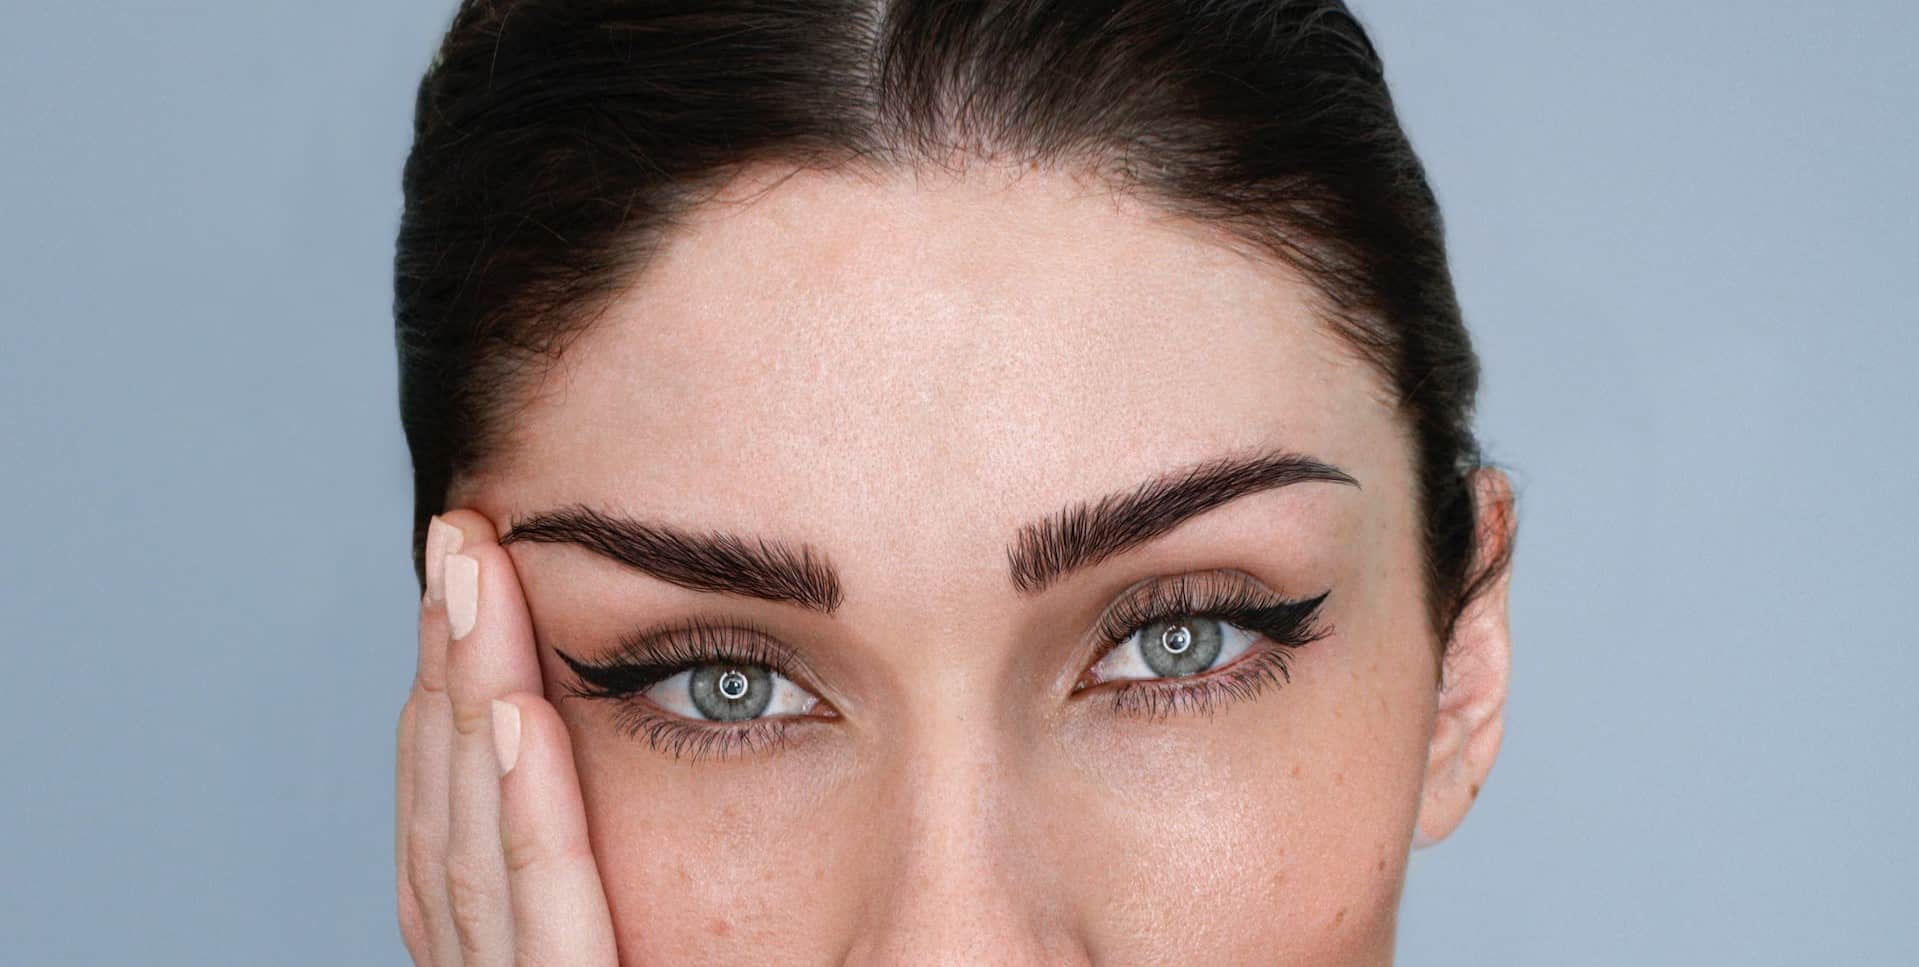 How to take care of eyebrows and eyelashes?